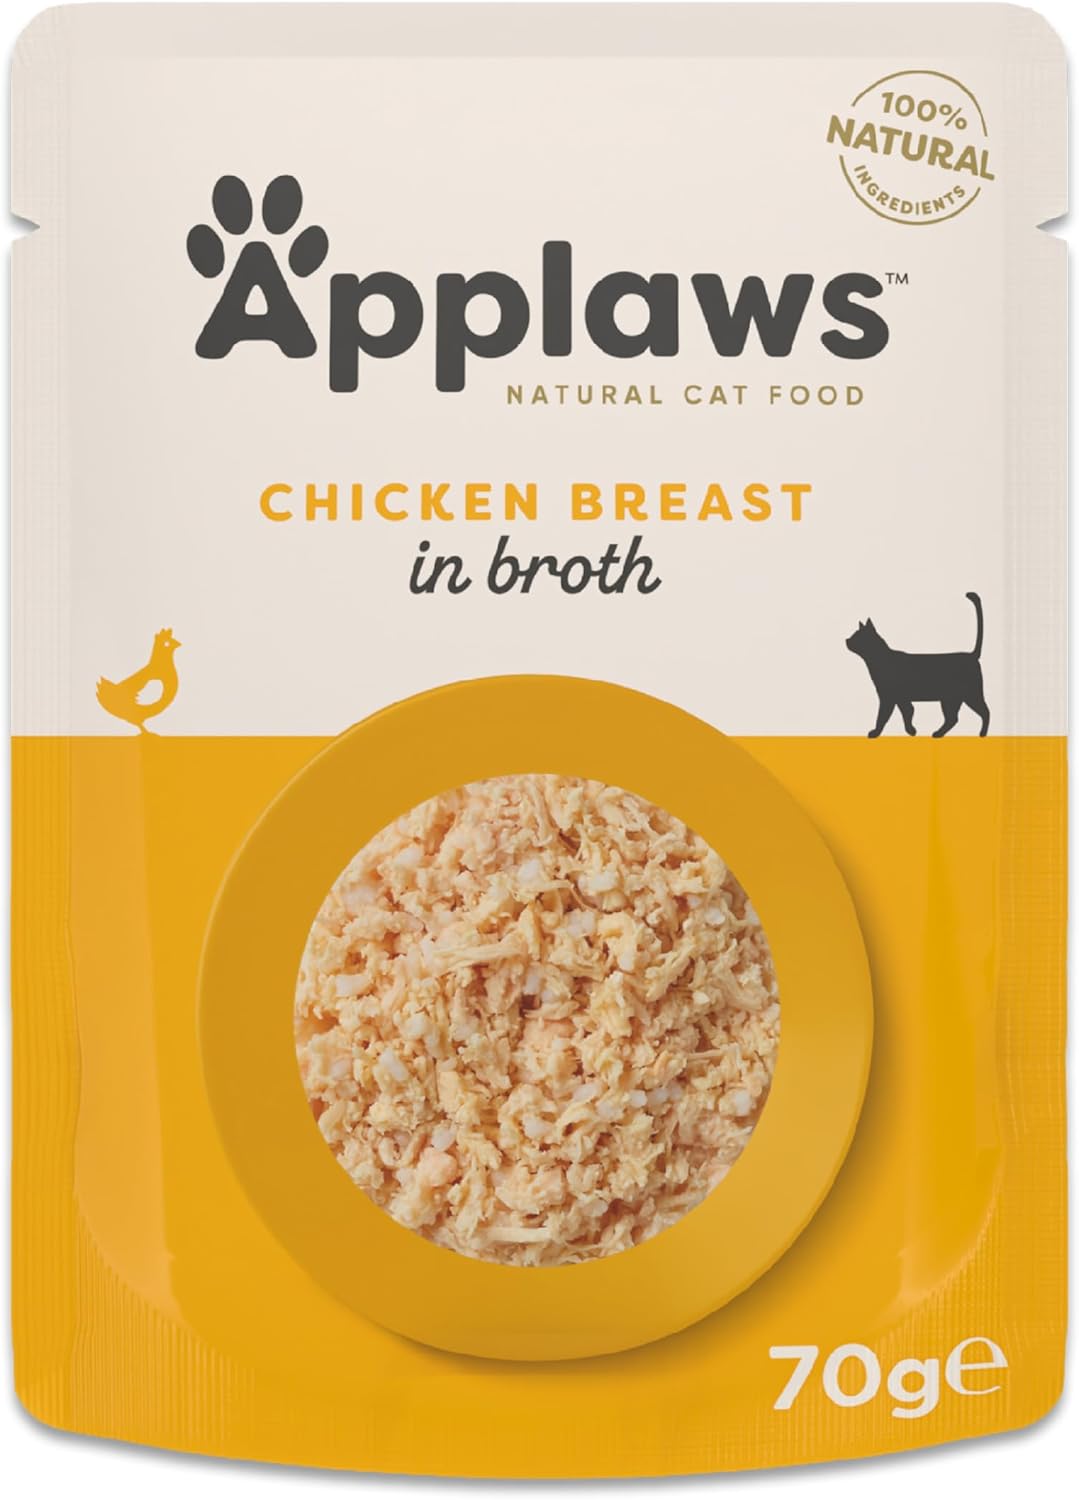 Applaws 100% Natural Adult Wet Cat Food, Chicken in Broth 70g Pouch (12 x 70 g Pouches)